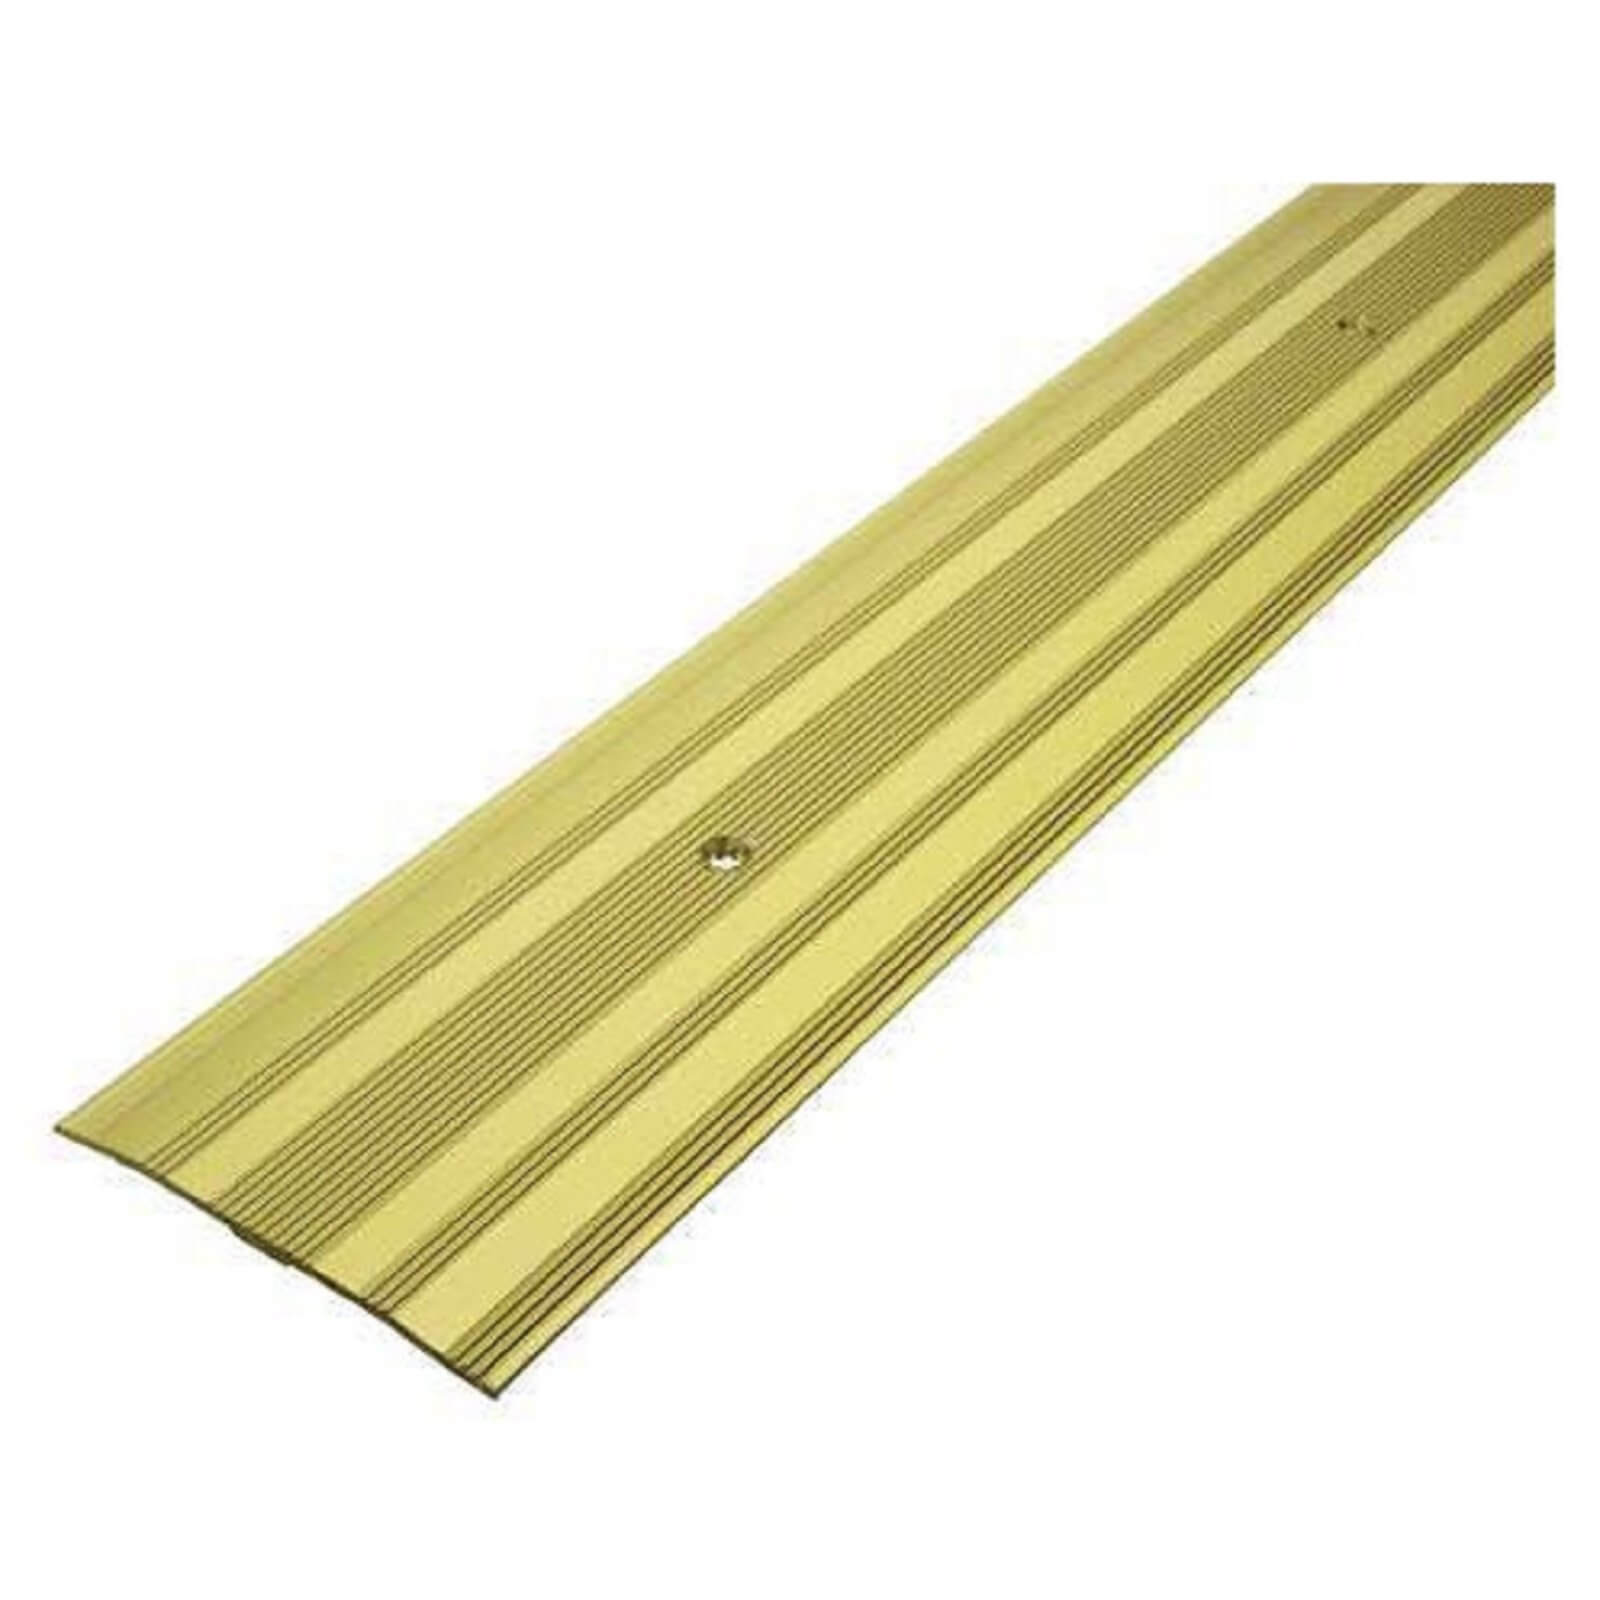 Photo of Extra Wide Cover Strip Carpet Edge - Gold 1800mm